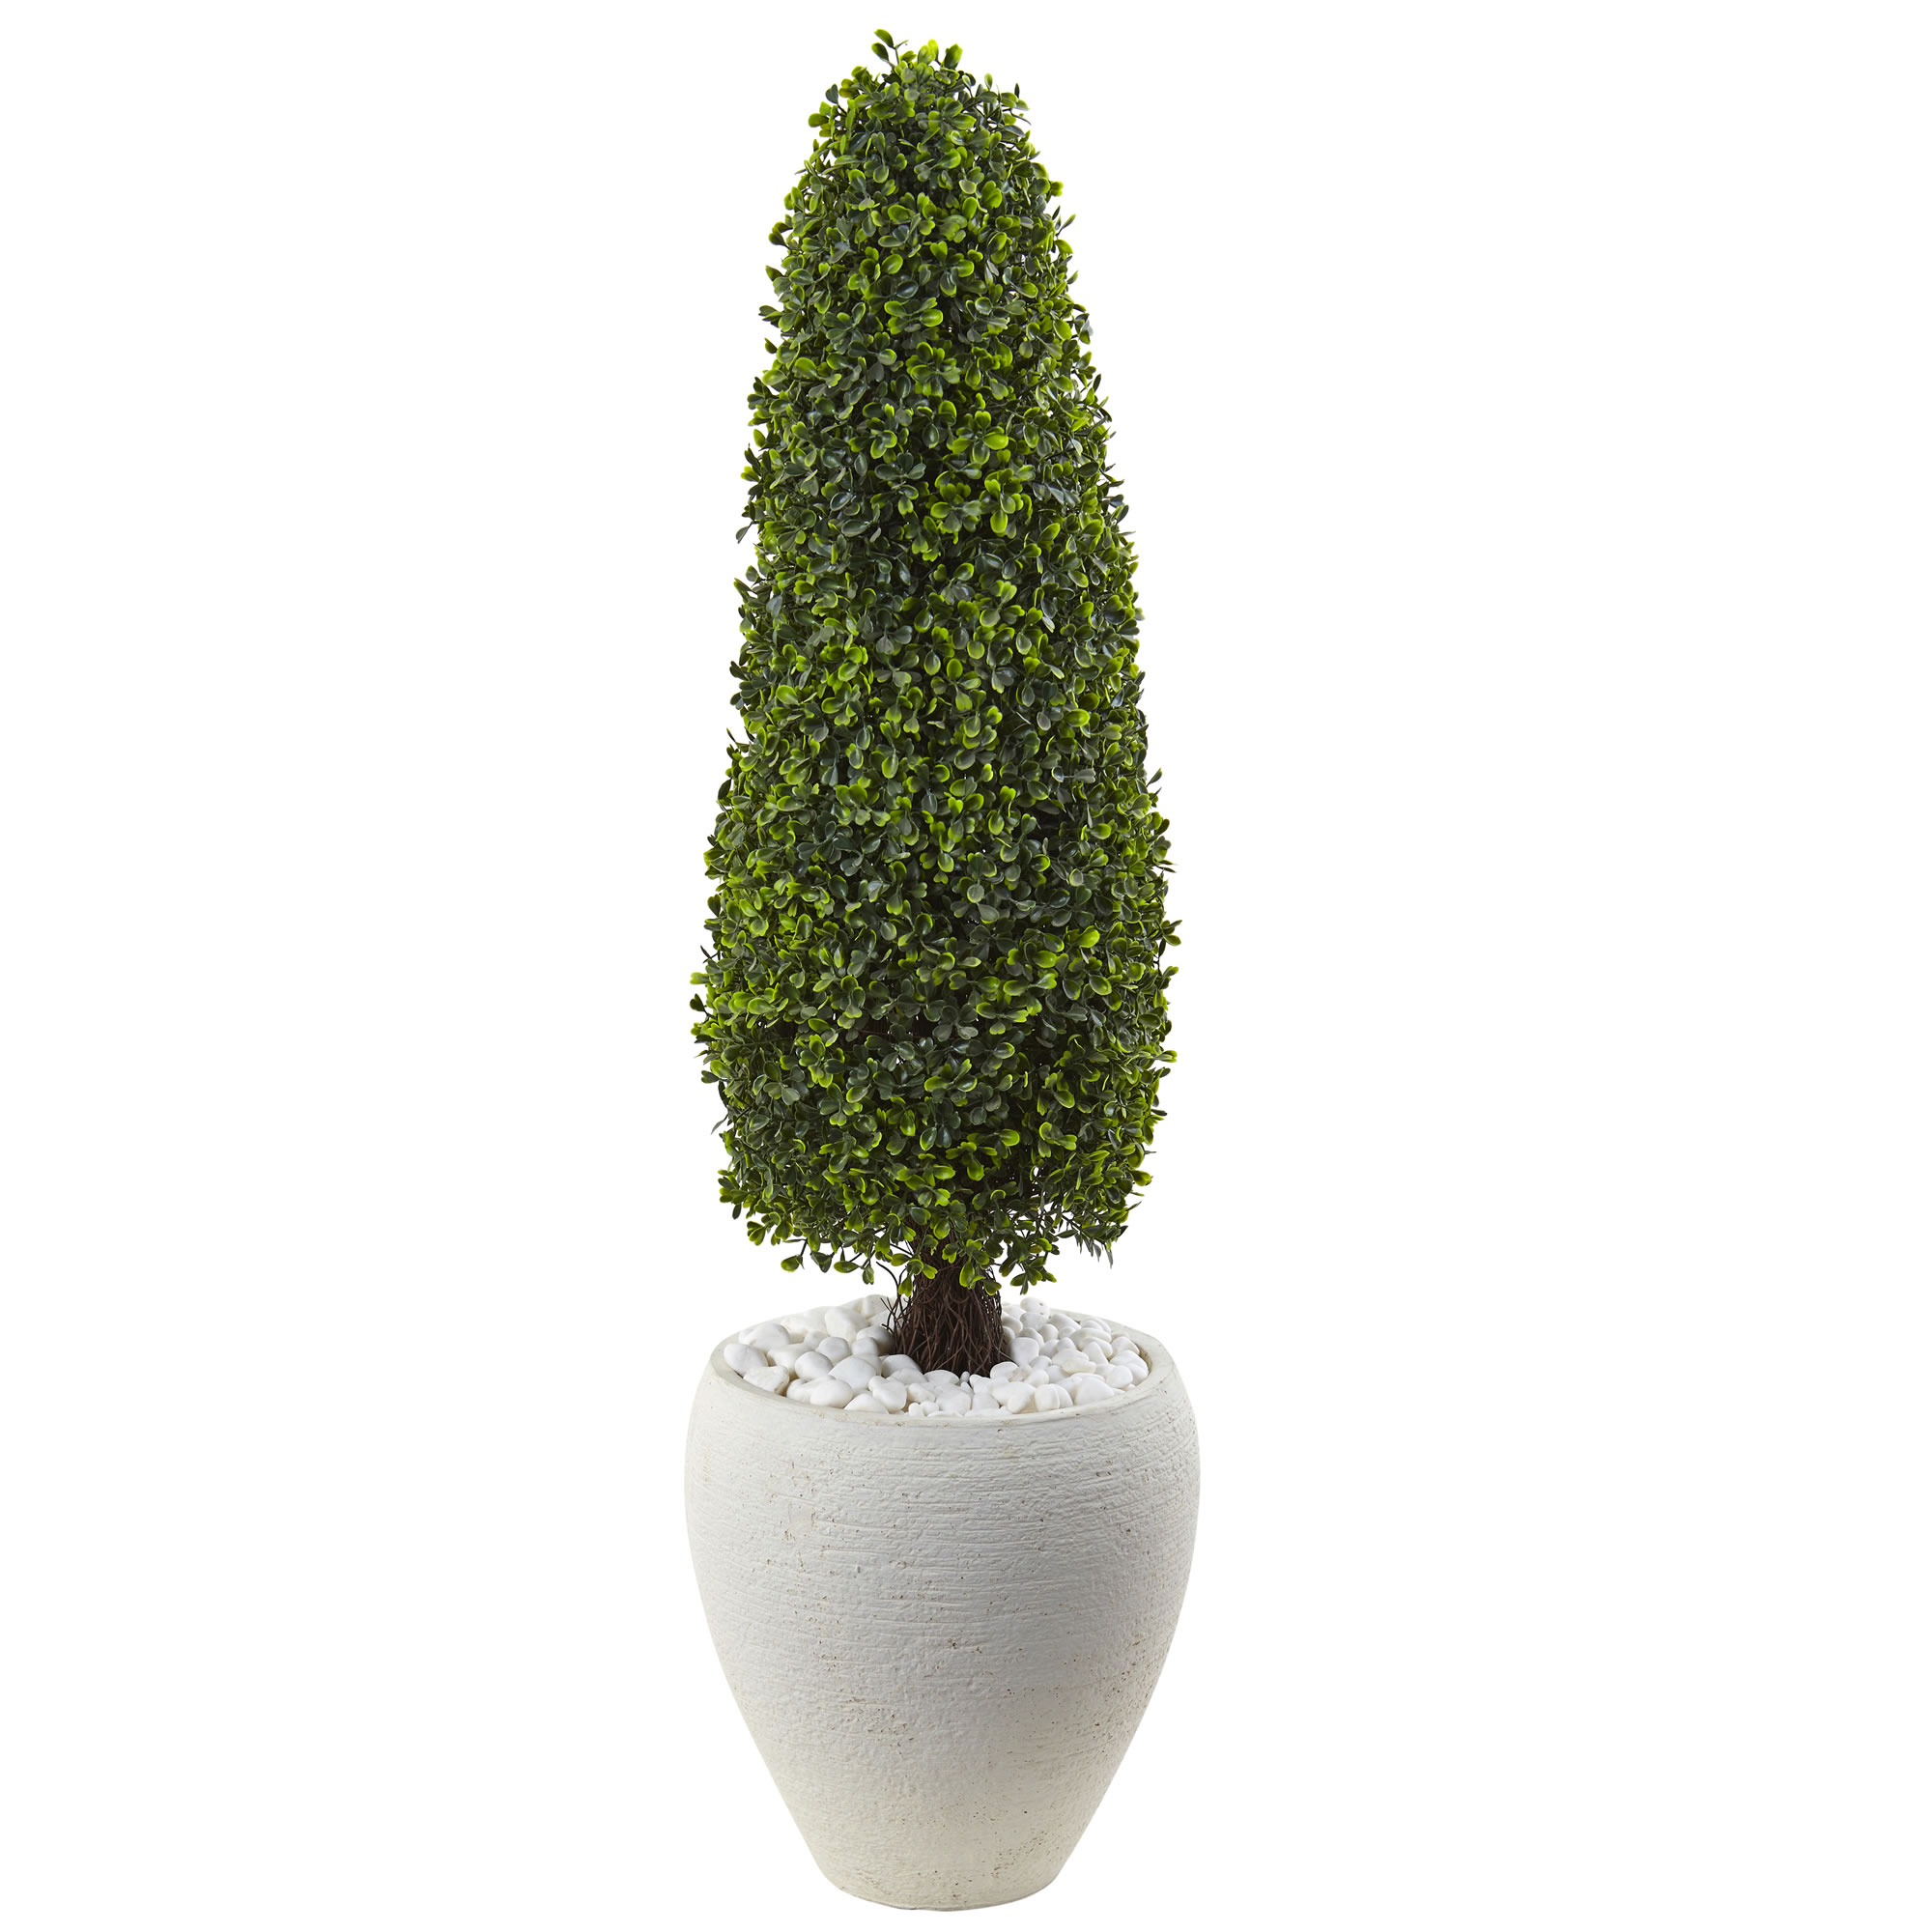 41 Inch Boxwood Topiary In Decorative White Planter: Uv Protected